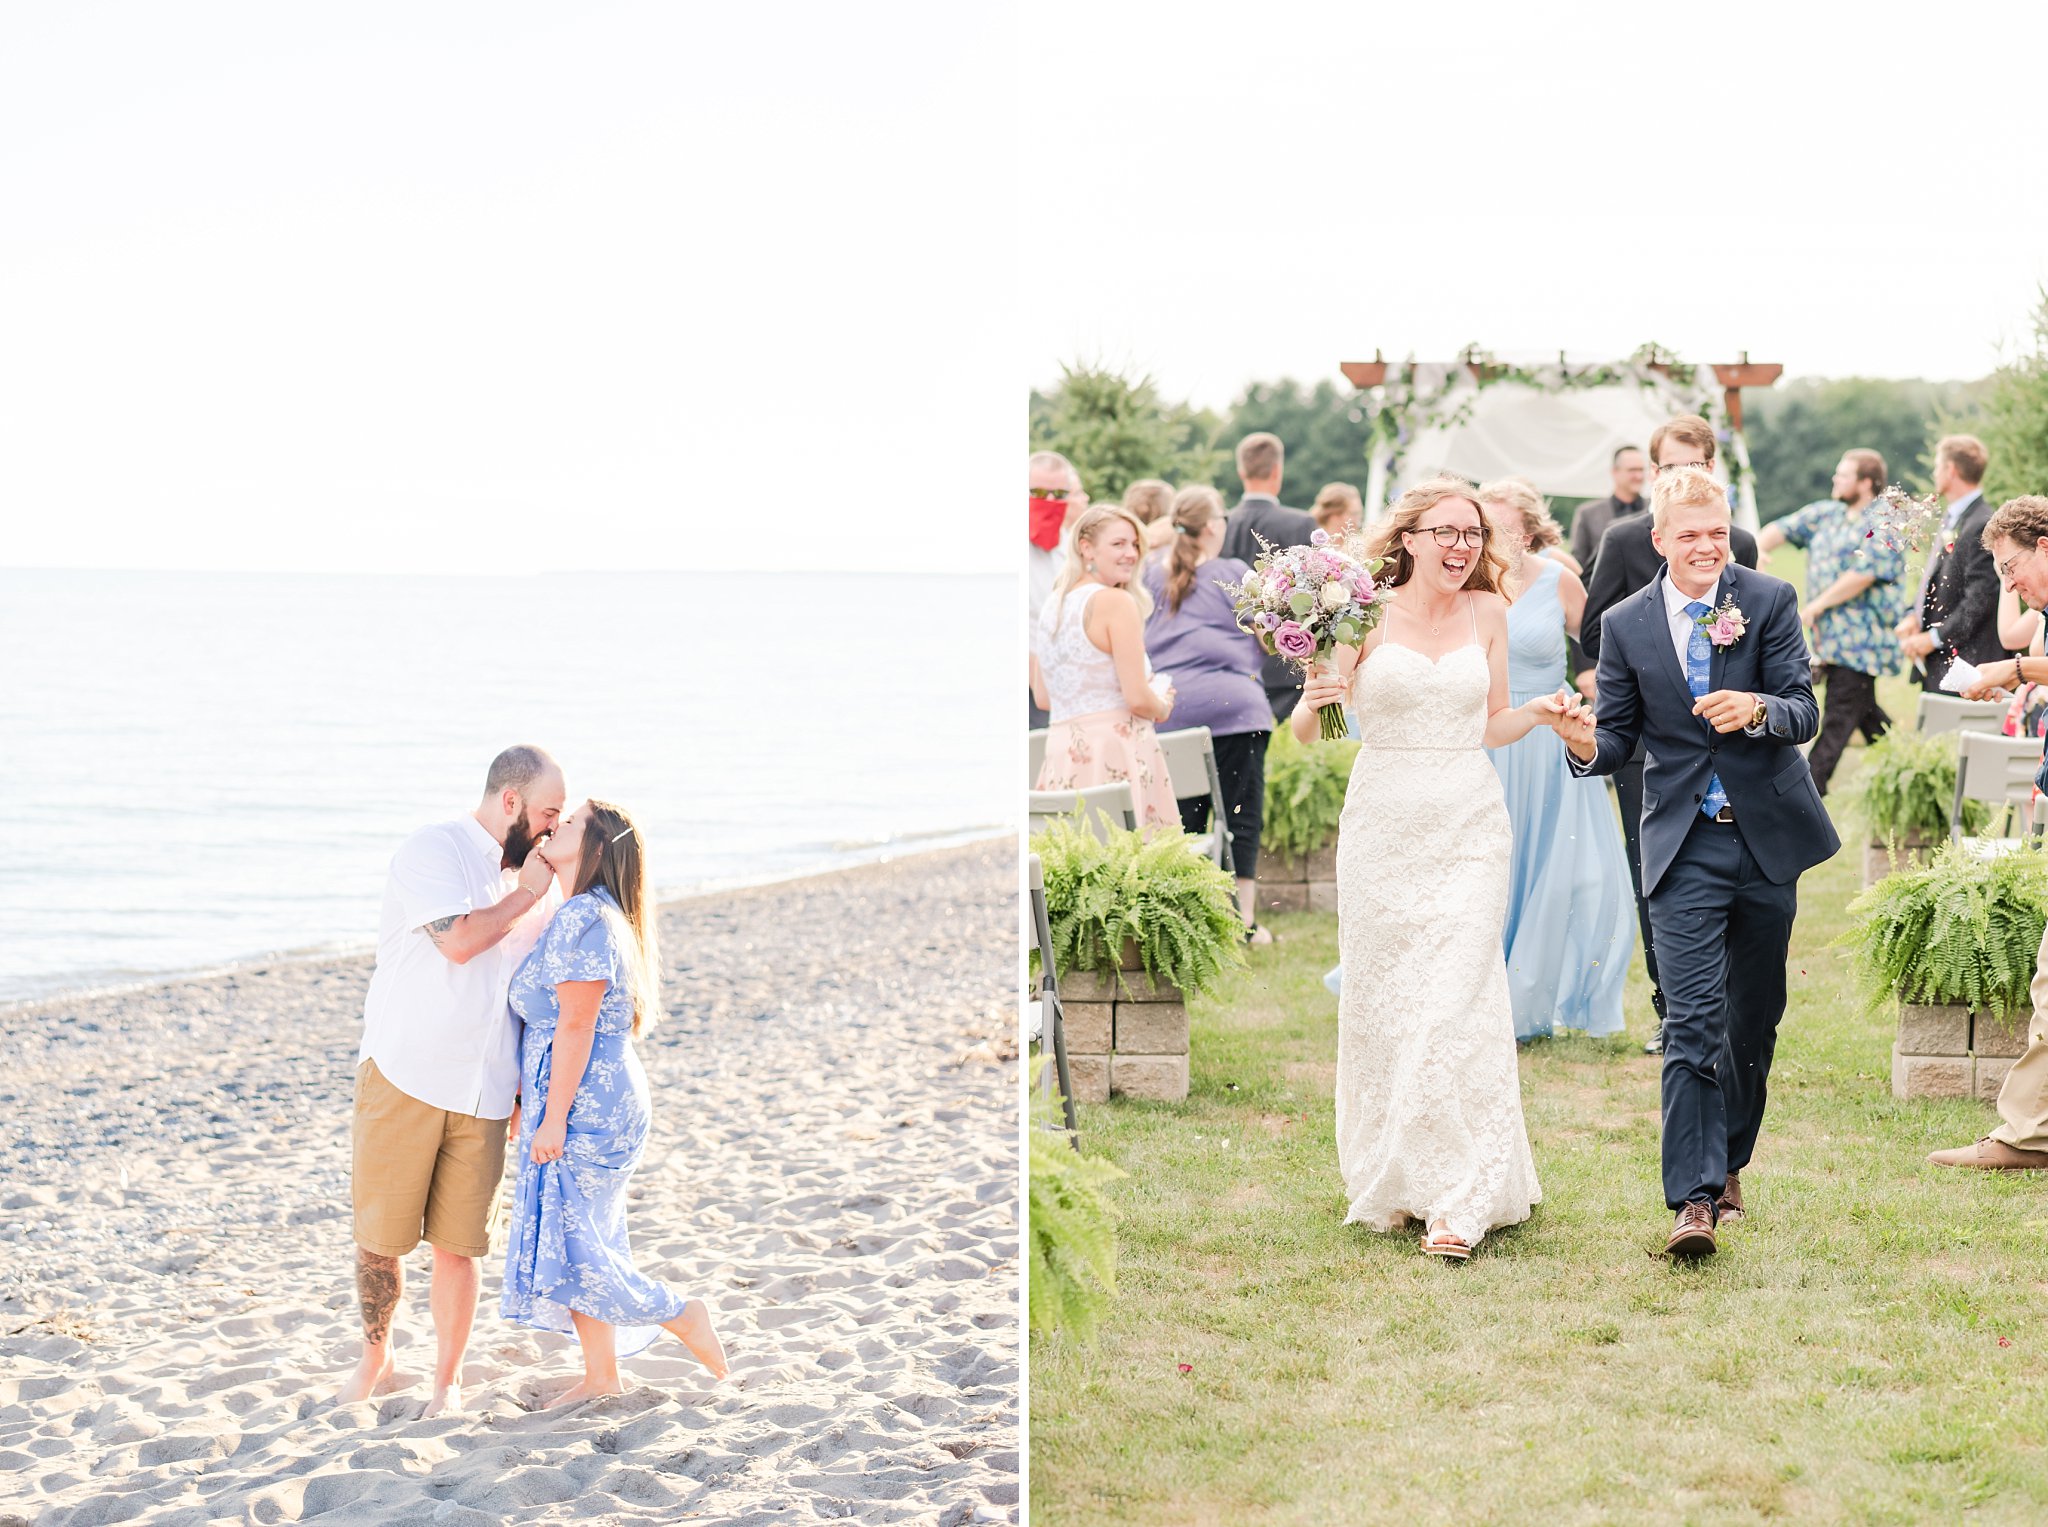 a photo of a man kissing a woman as they walk along the beach in port stanley paired beside a photo of a bride and groom laughing as they walk down the aisle after their wedding ceremony